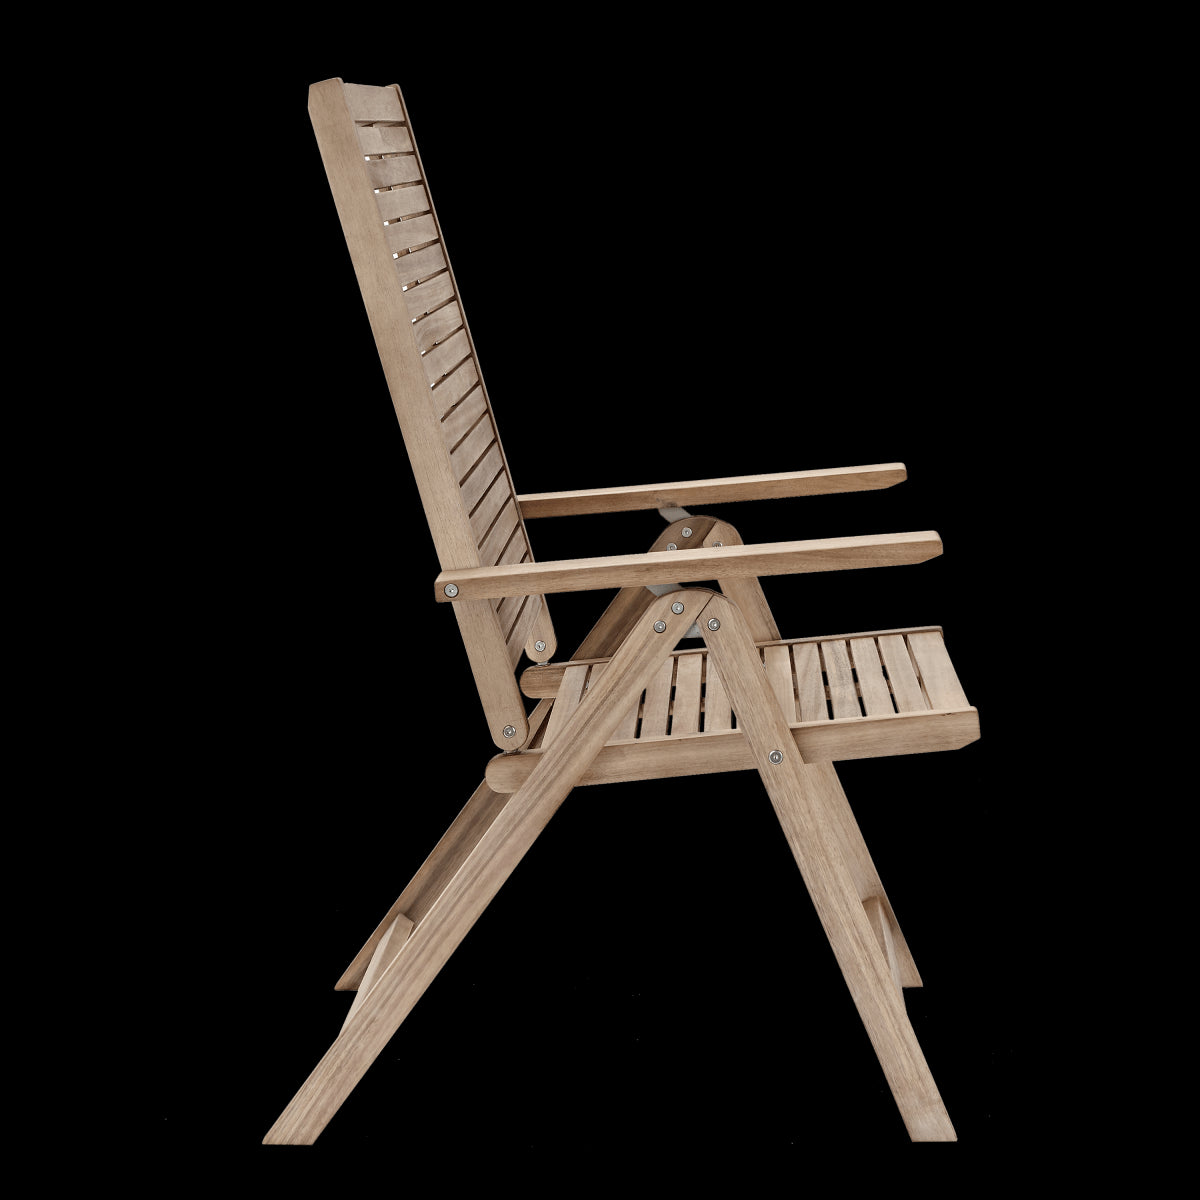 BRICOCENTER - SOLARIS NATERIAL - Foldable armchair with Armrests - Acacia wood - 59x75xh109.5